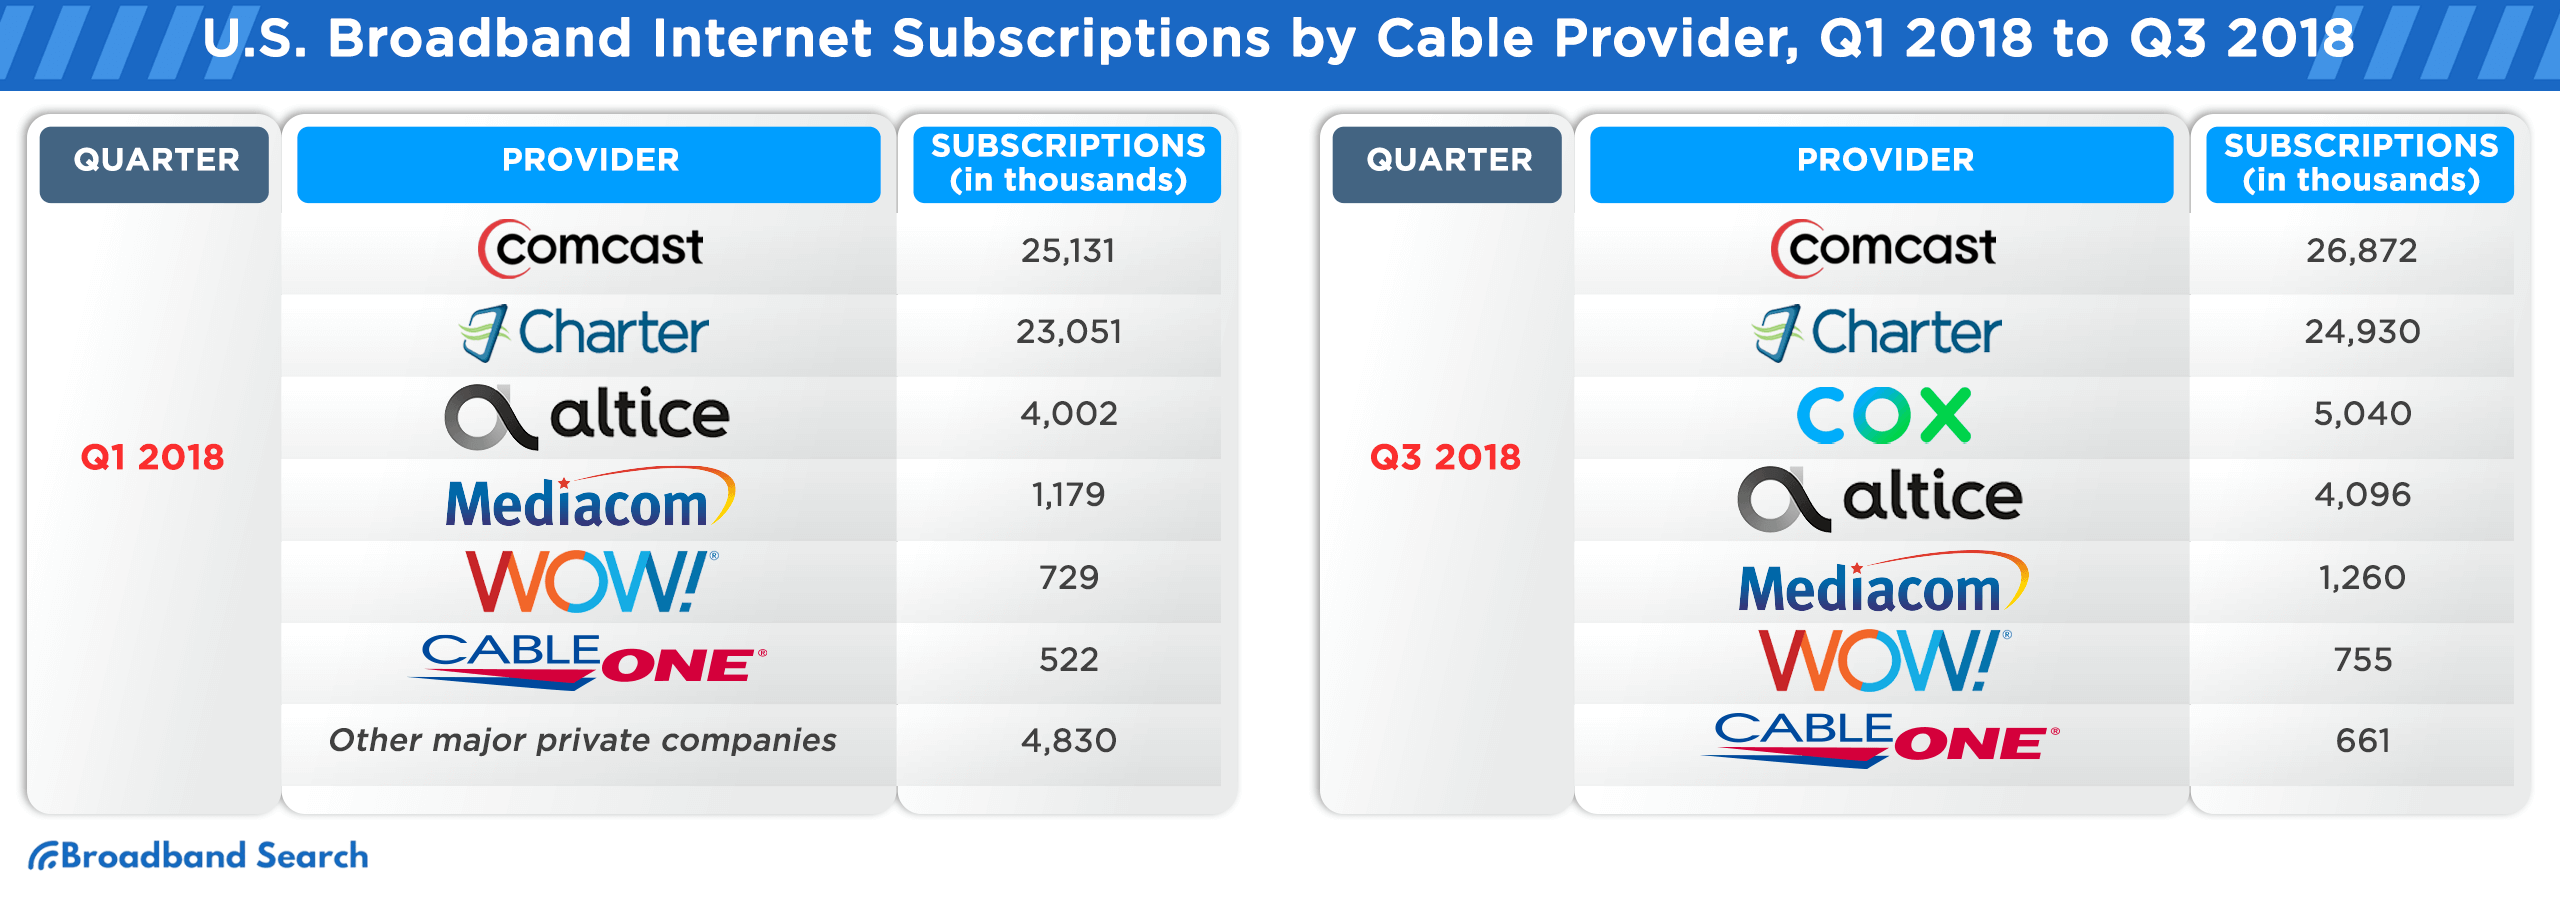 U.S. Broadband Internet Subscriptions by cable provider for quarters one to three of 2018